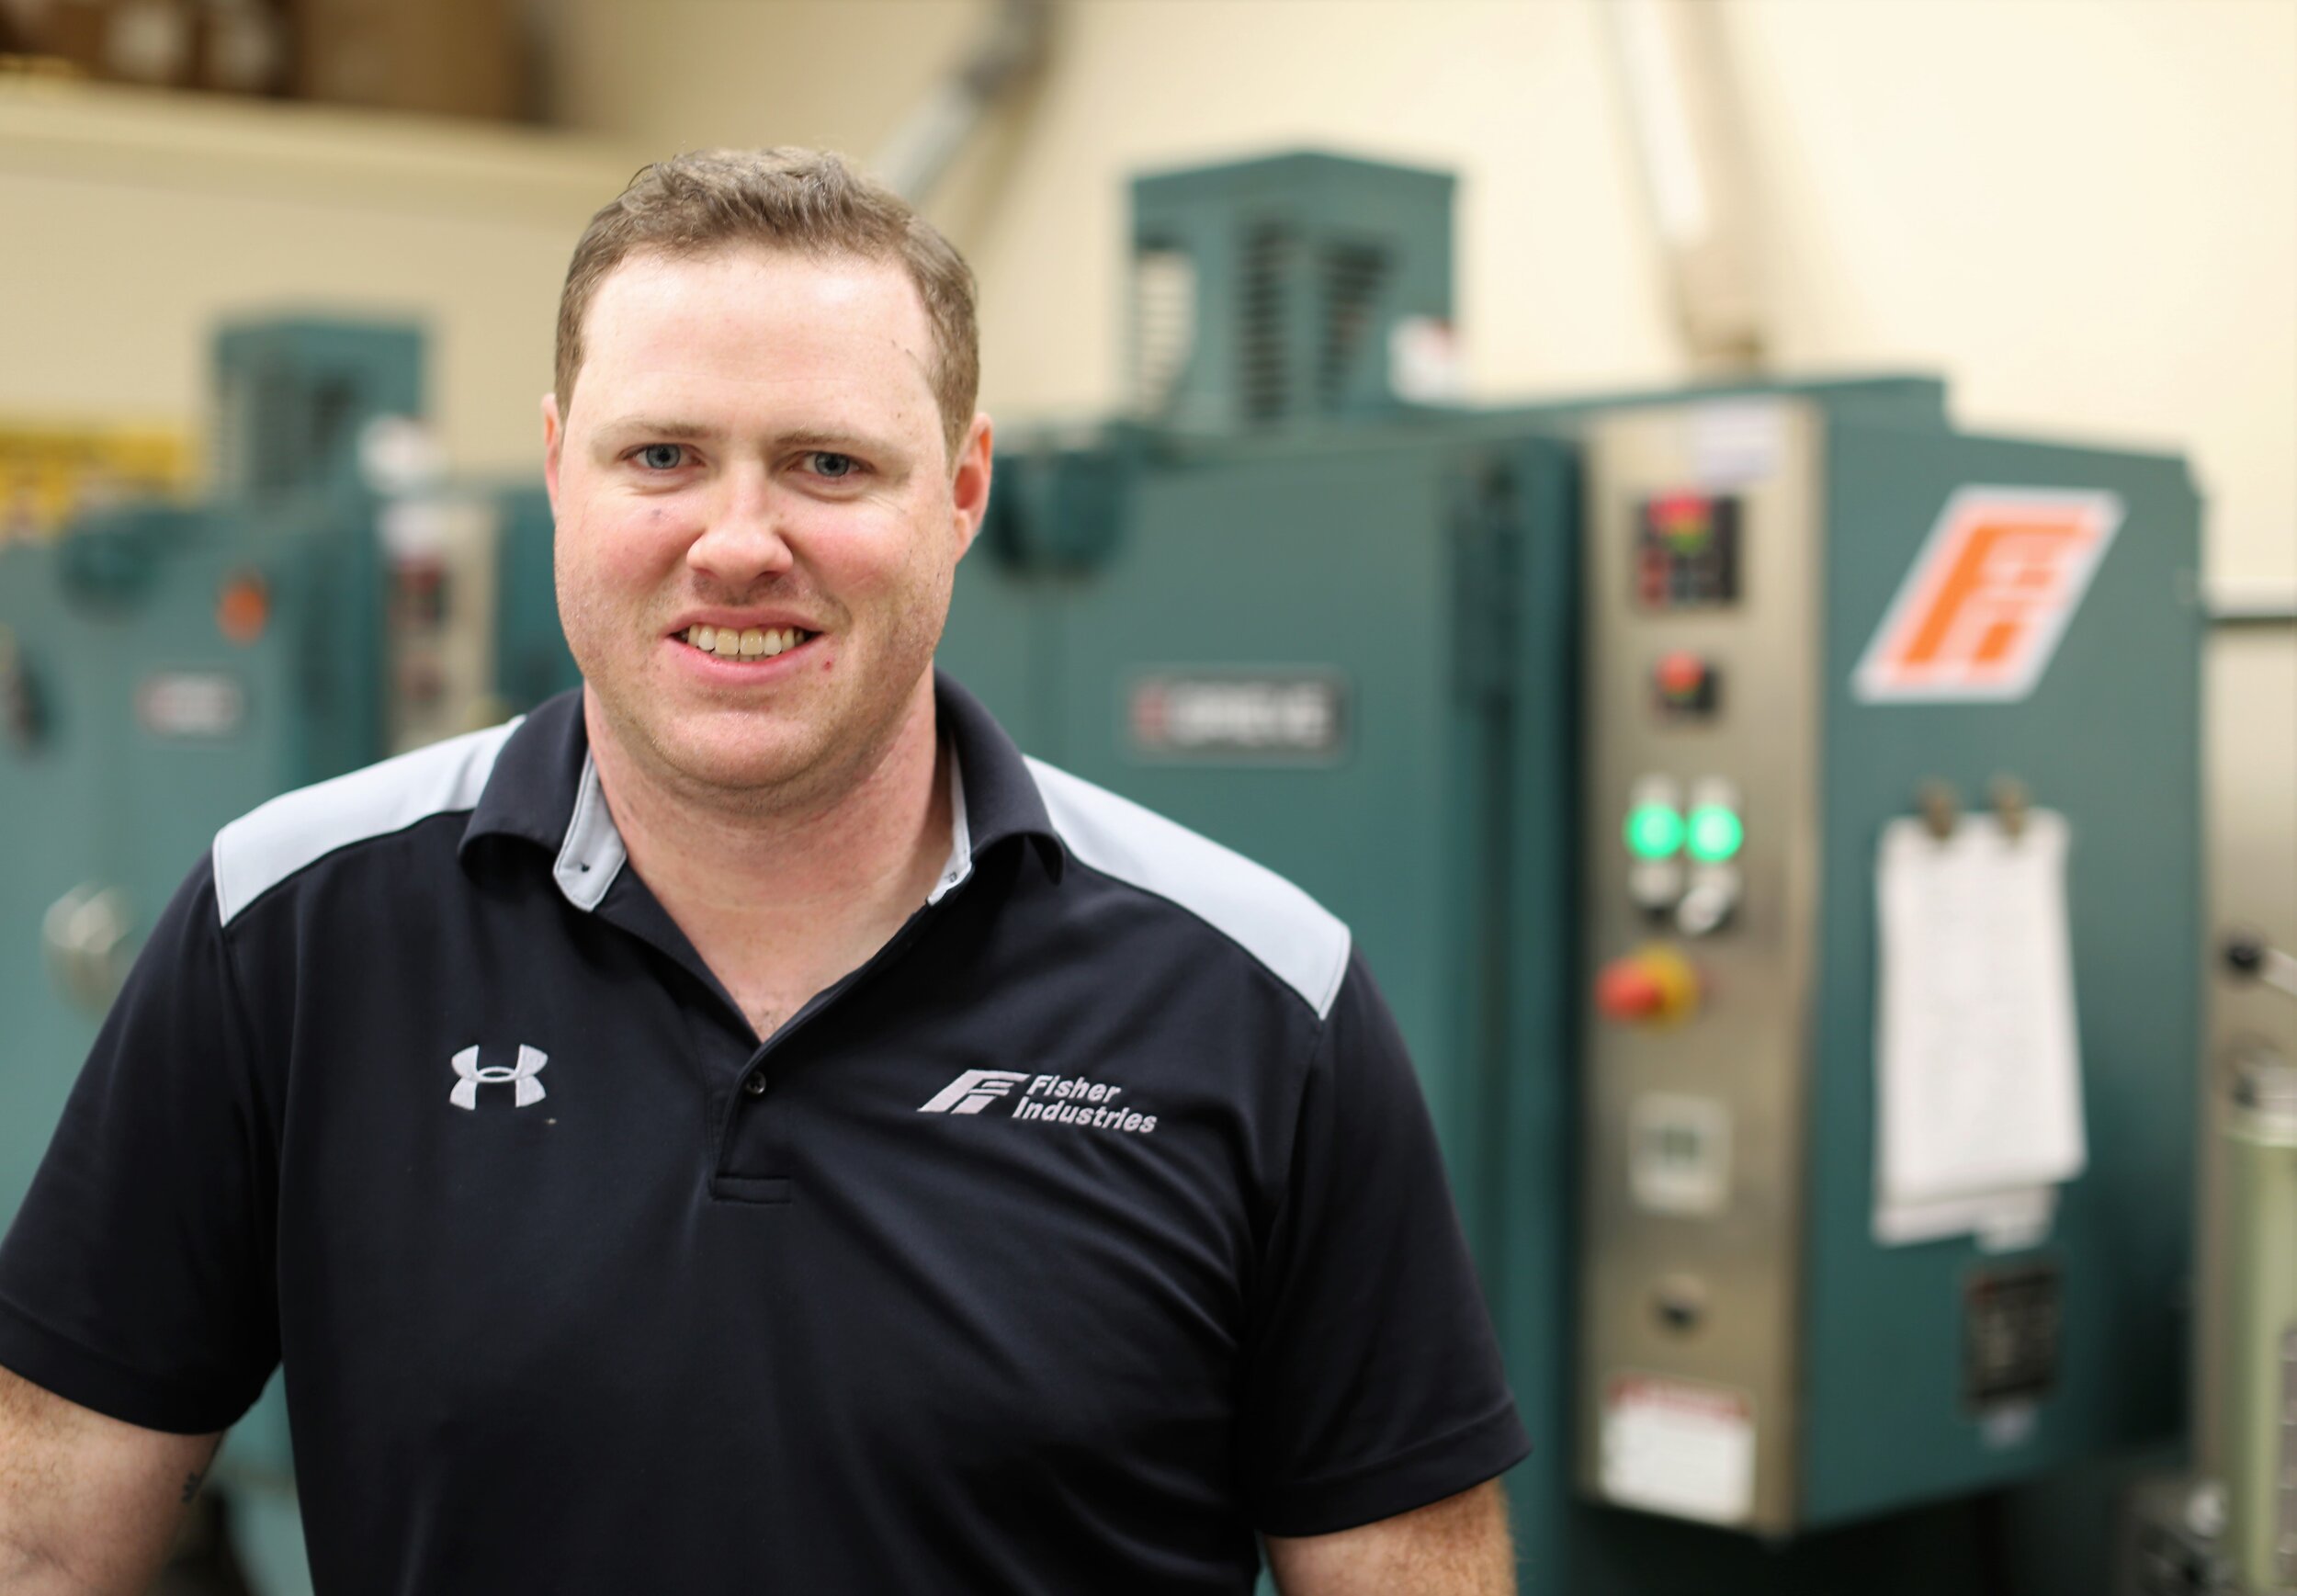  “What I enjoy most about working at Fisher is making a design in the lab and knowing it will work out great in the field.”  -Justin Friend, FSG Quality Control Technician 